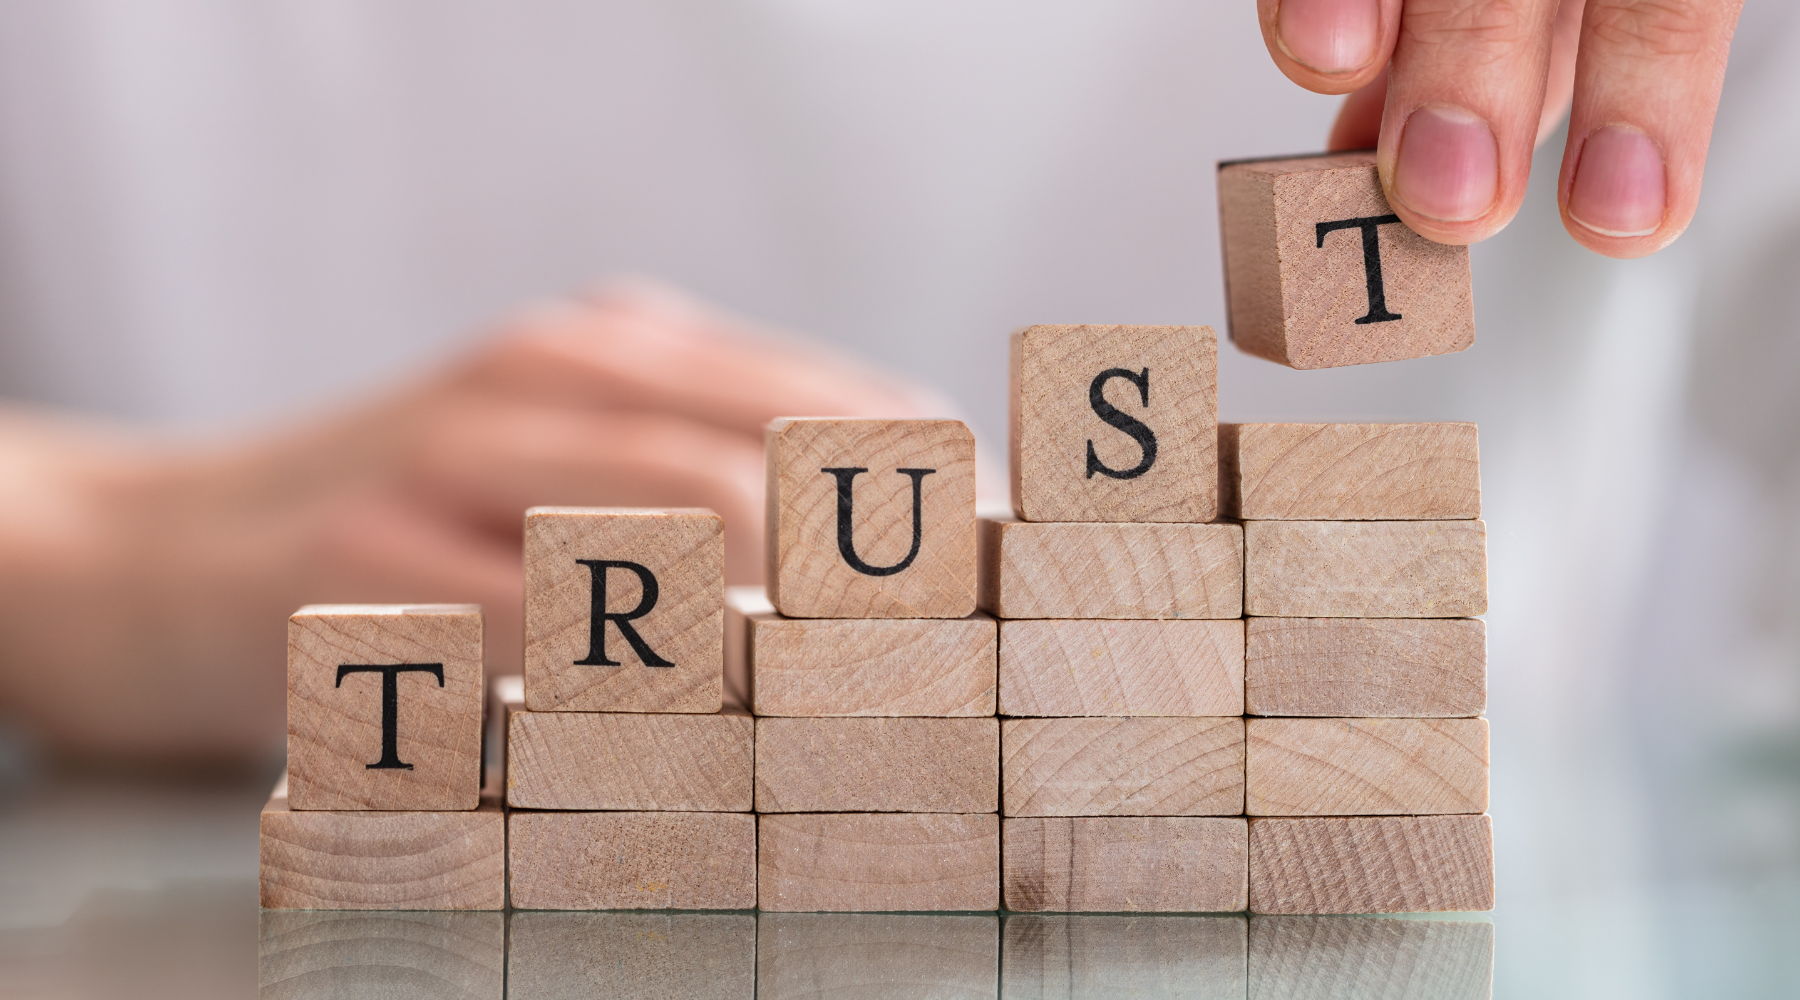 How do you build trust with your team?￼